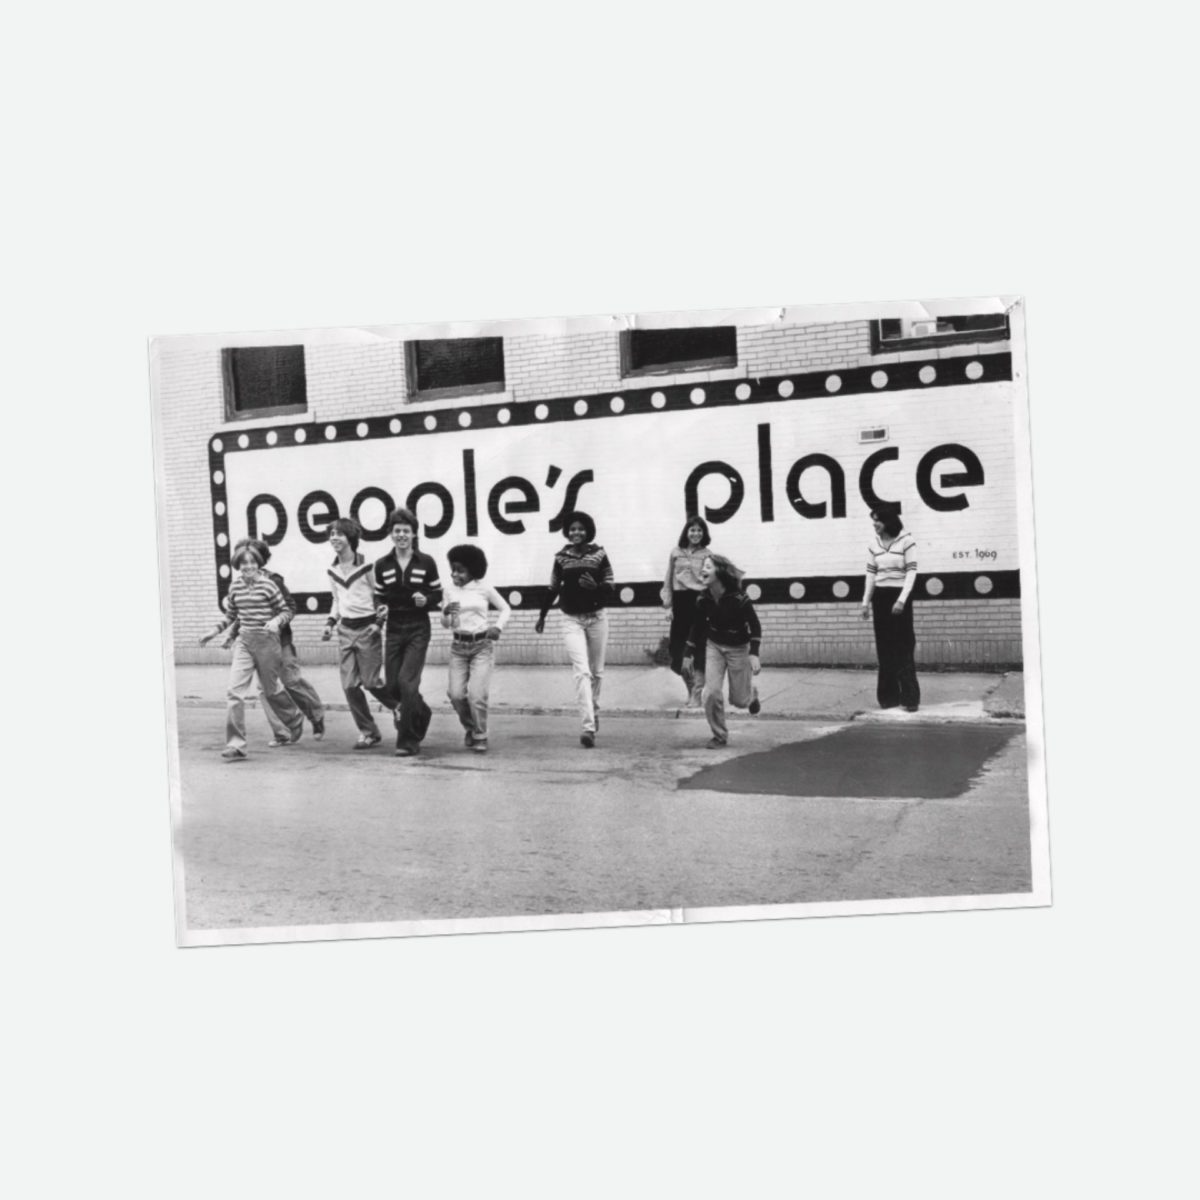 People’s Place. Photographed by Peoples Place partner and co-founder Larry Stemerman, circa 1970